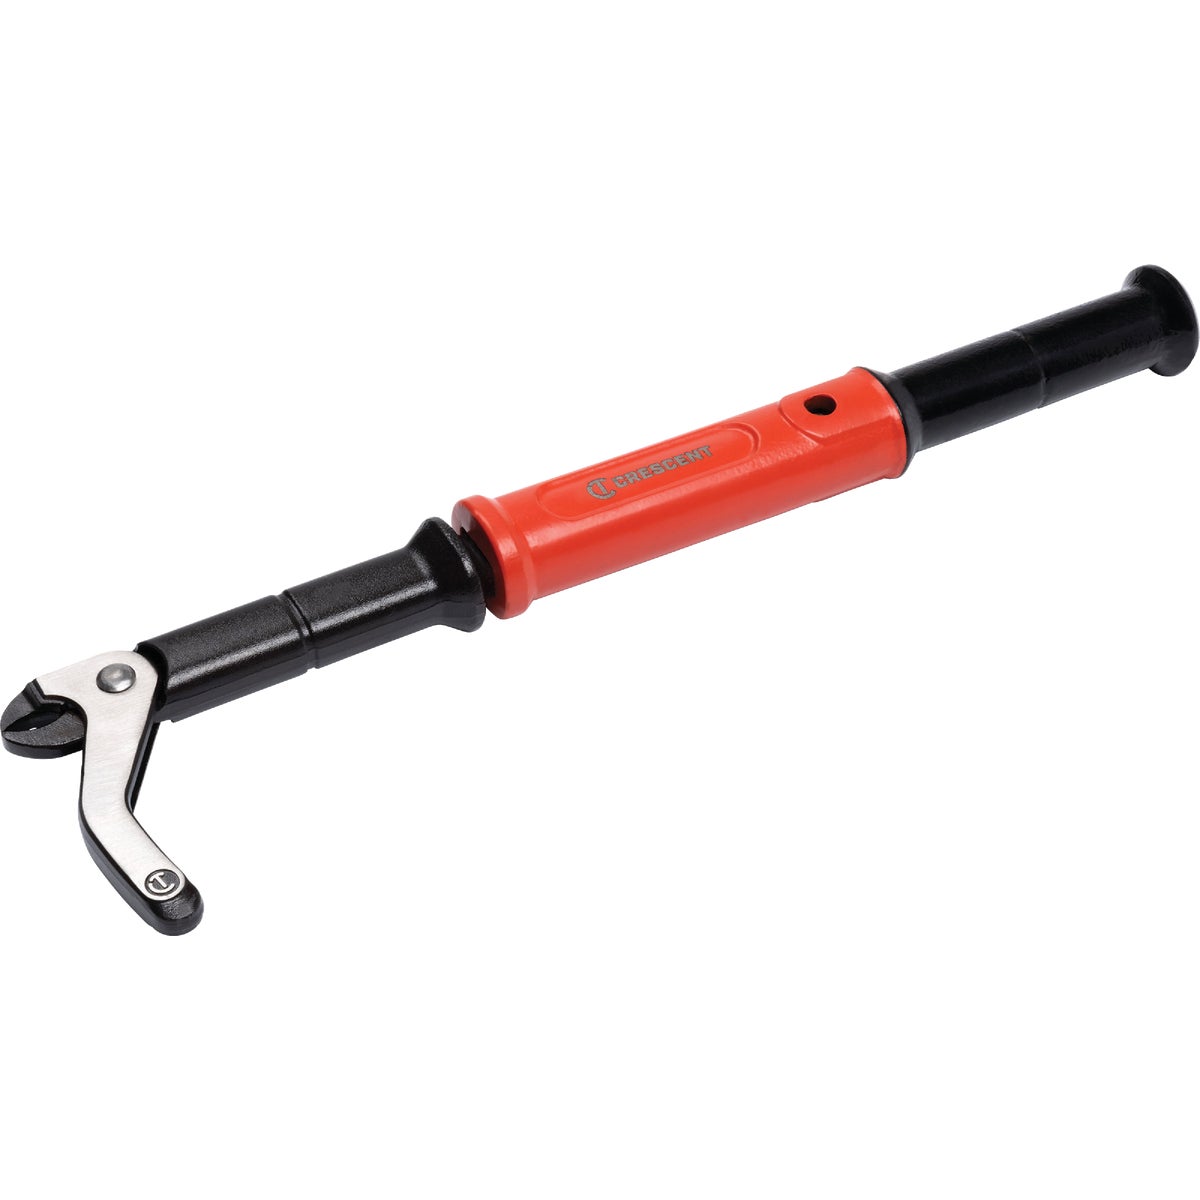 Crescent 19 In. L Nail Puller